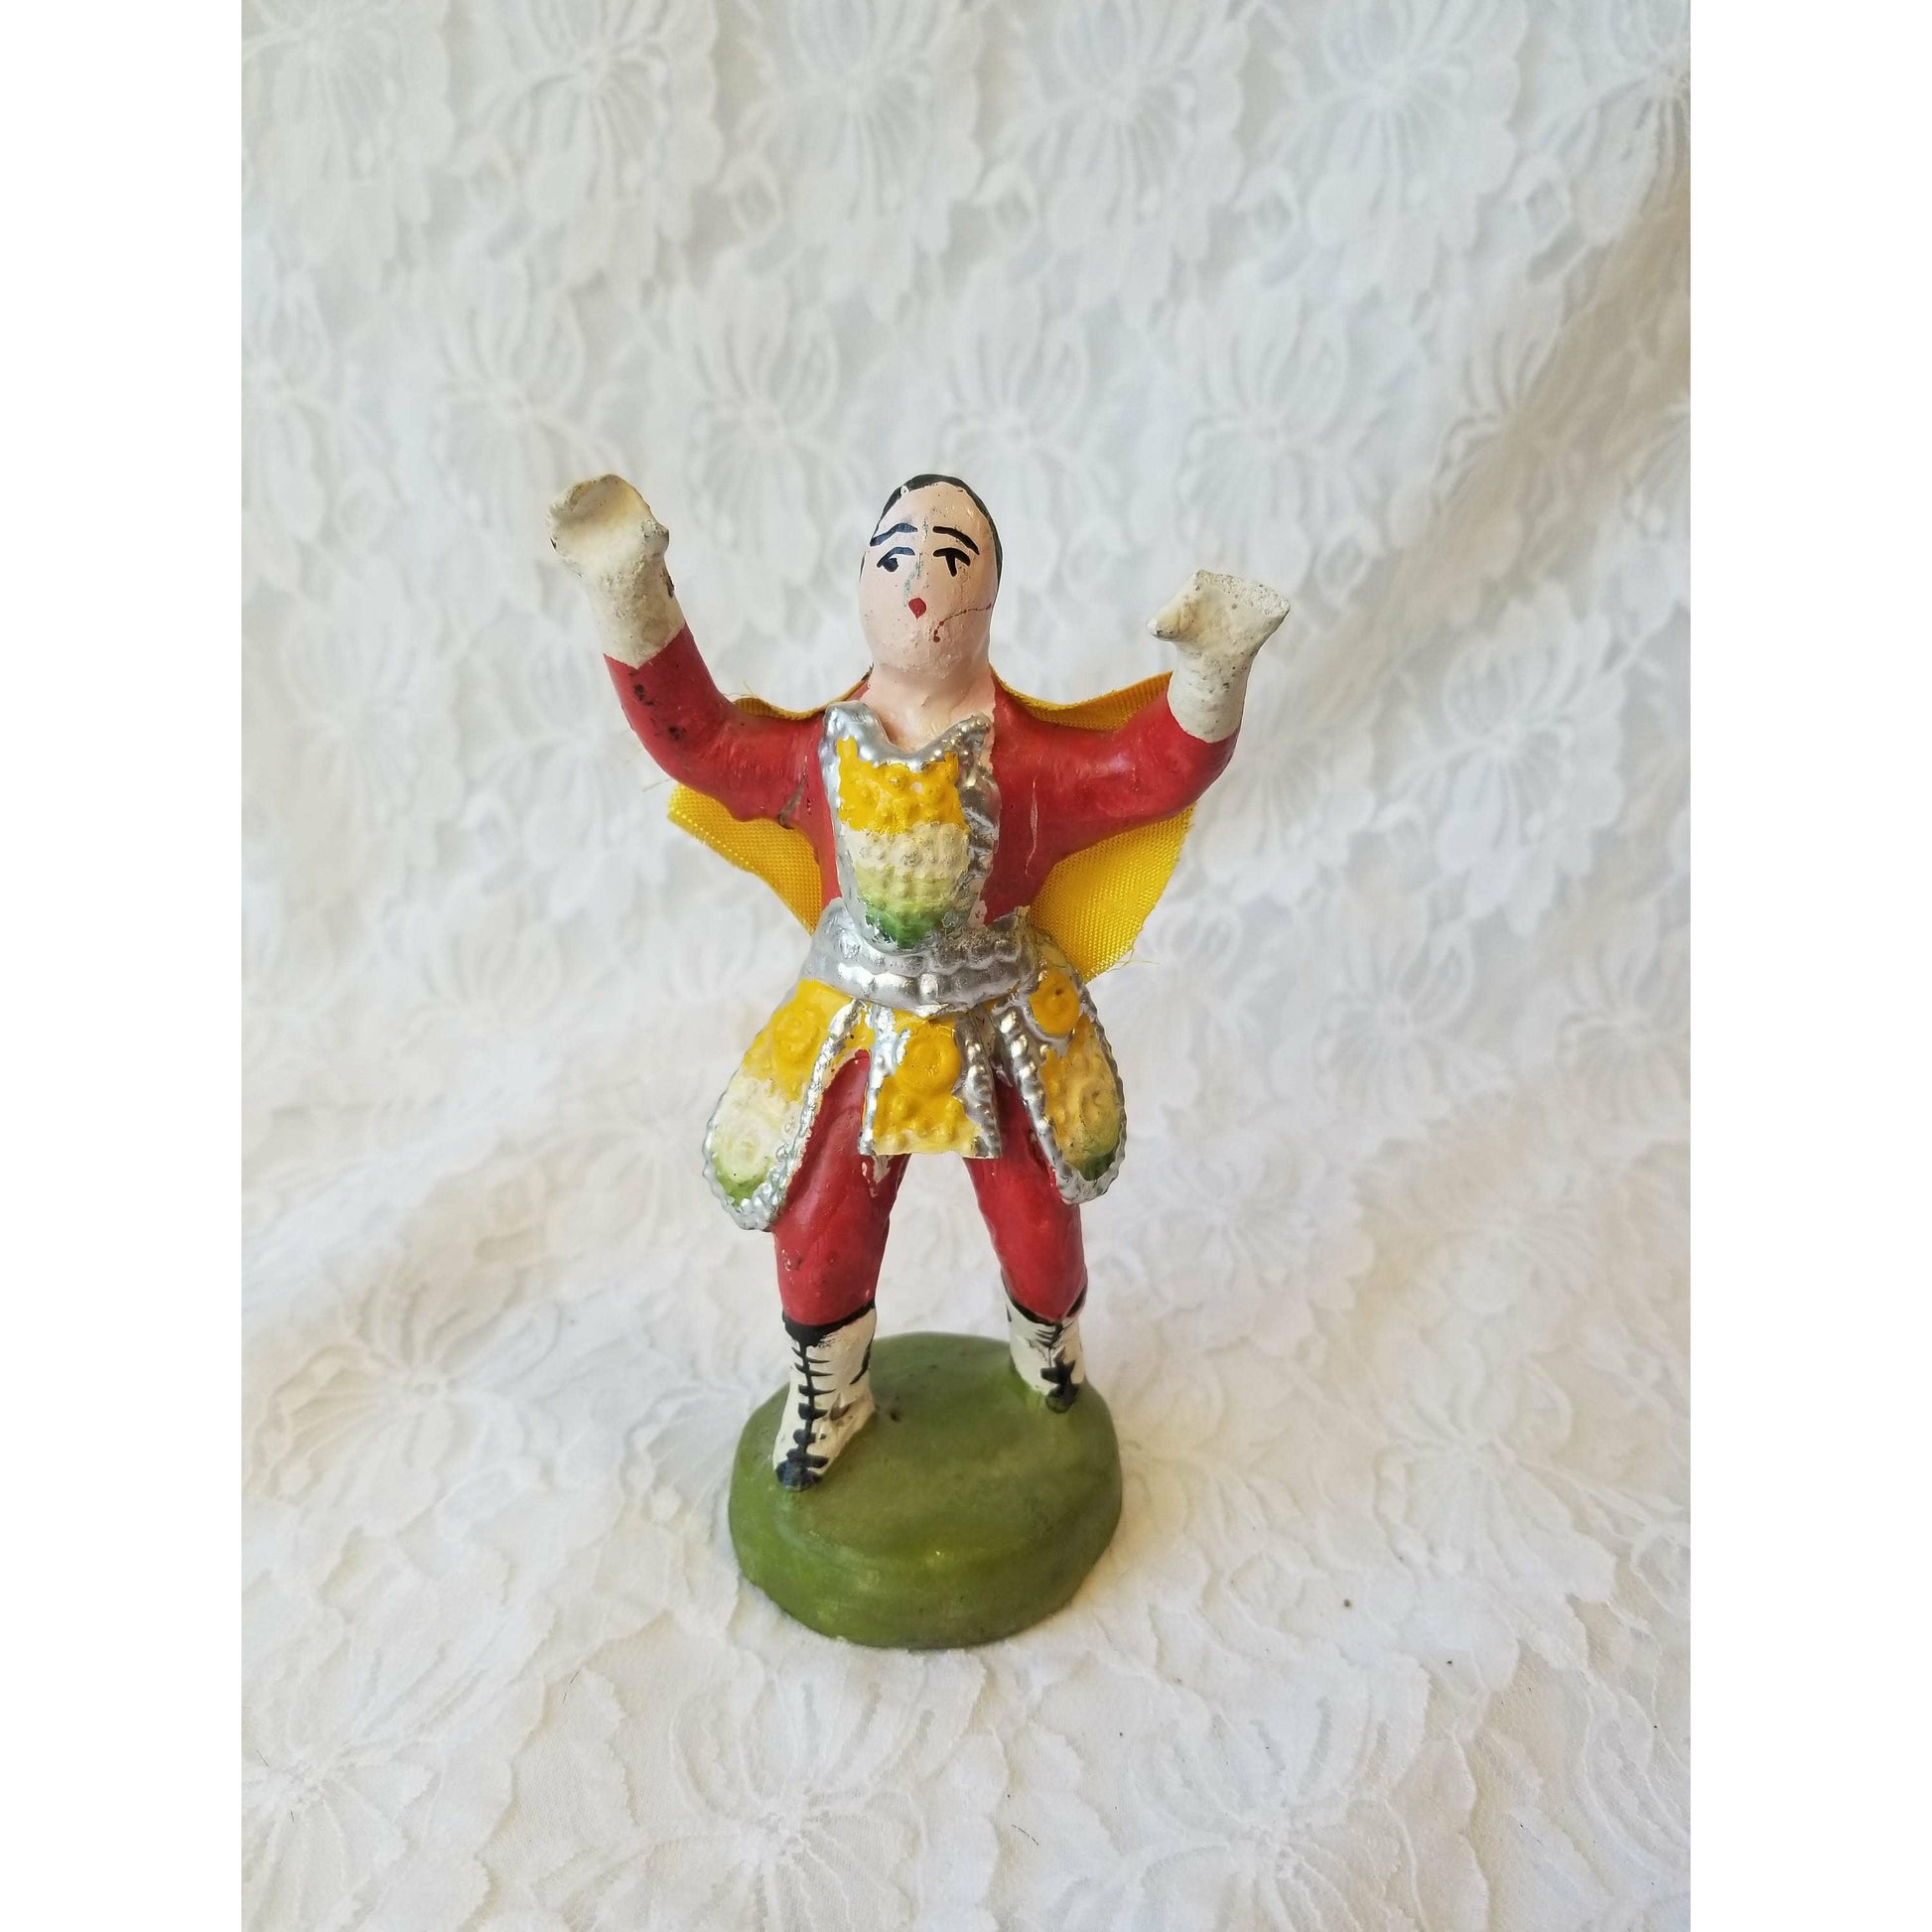 Mexican Wrestling Nacho Libre Figurine ~ Possibly Paper Mache and/or Clay ~ Made in Mexico ~ Rare and HTF Wrestler Figurine 